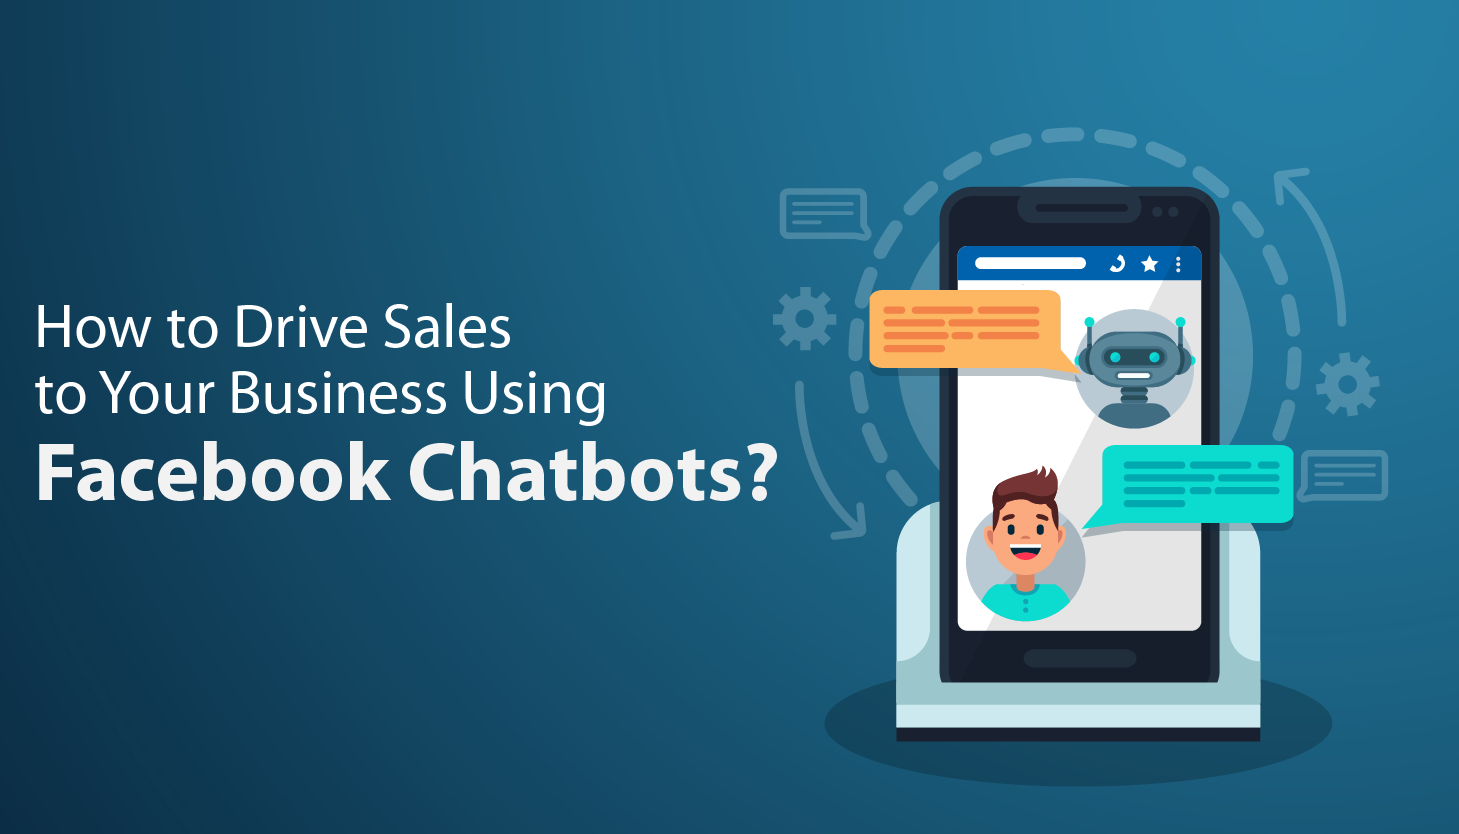  How to Drive Sales to Your Business Using Facebook Chatbots?